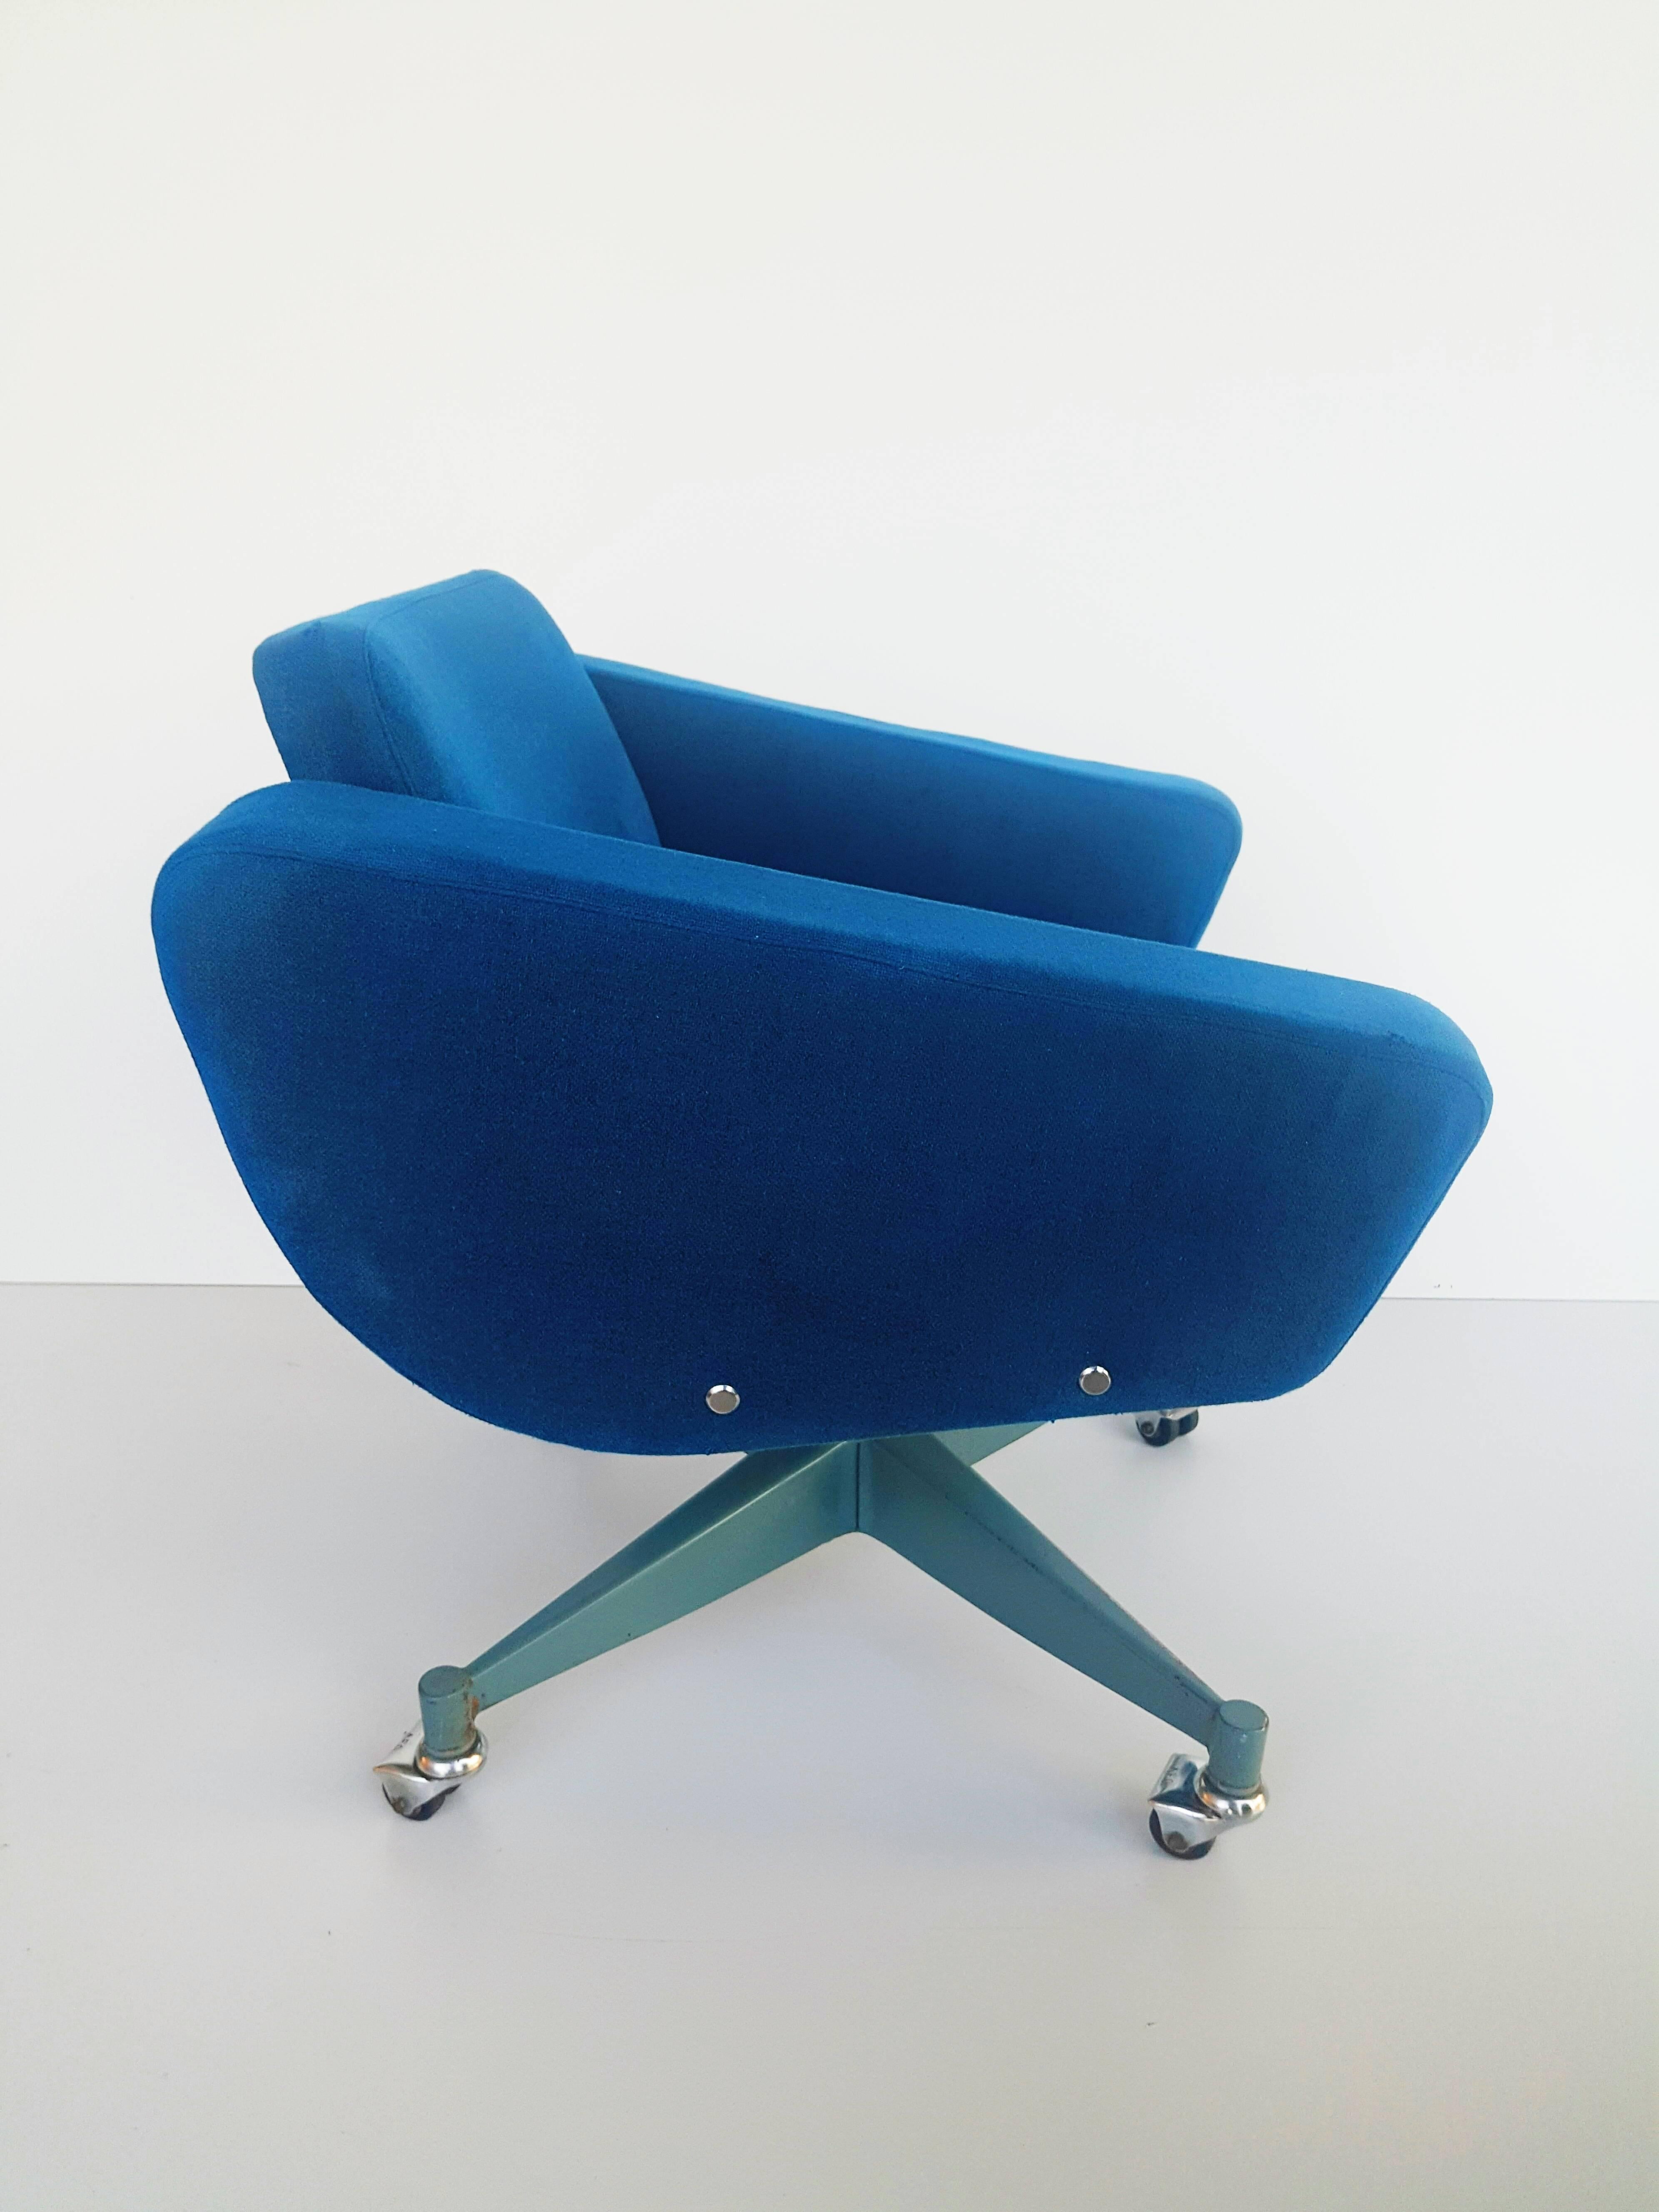 Rare and beautiful armchair by Vives, Spain, 1970s. In original blue oil fabric, with metal star leg on double wheels.